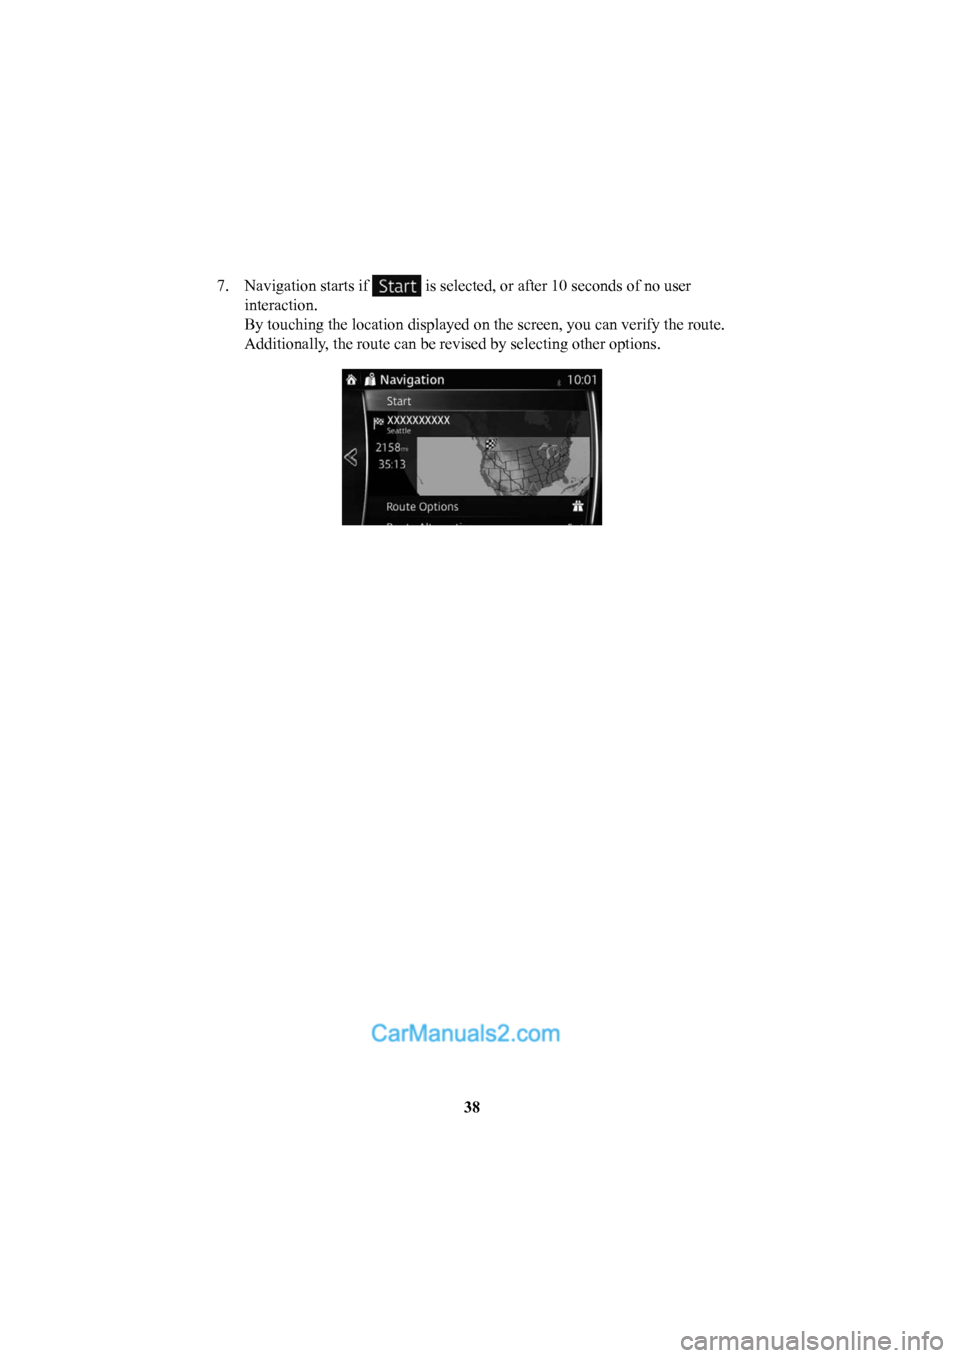 MAZDA MODEL CX-5 2016  Navigation Manual (in English) 38
7.  Navigation starts if 
 is selected, or after 10 seconds of no user 
interaction.
By touching the location displayed on the screen, you can verify the rou\
te. 
Additionally, the route can be re